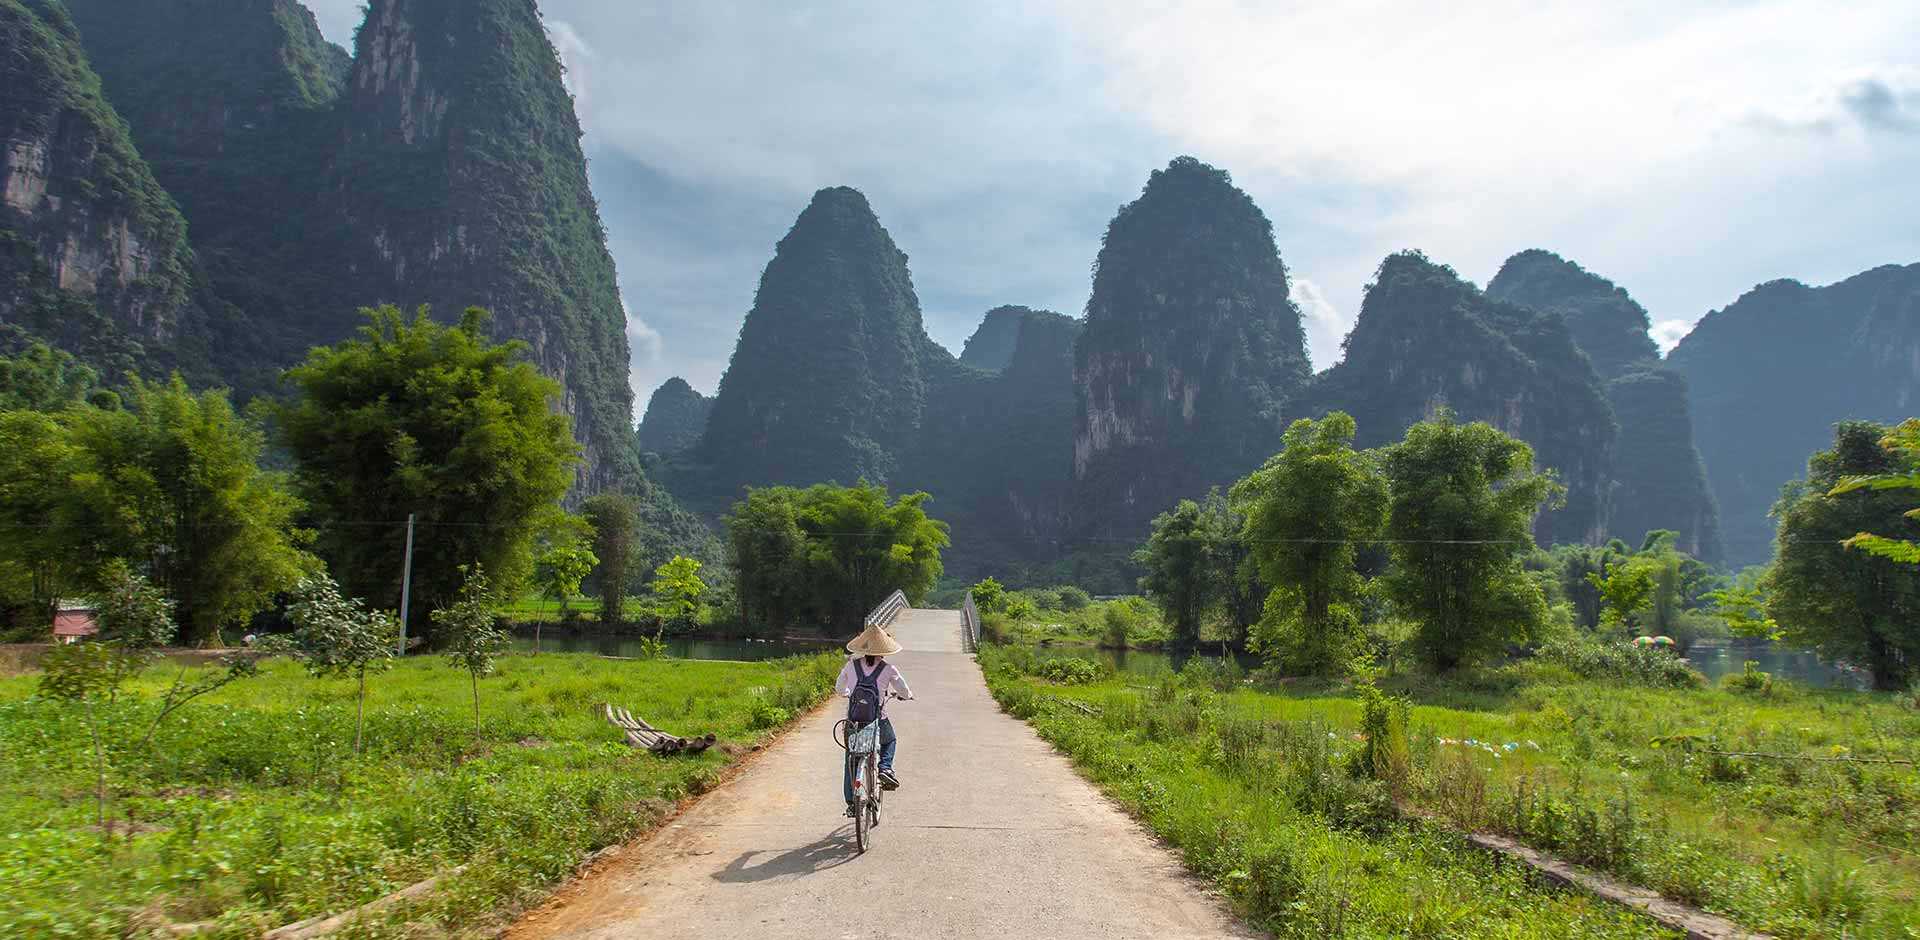 Guilin Pictures | Download Free Images on Unsplash